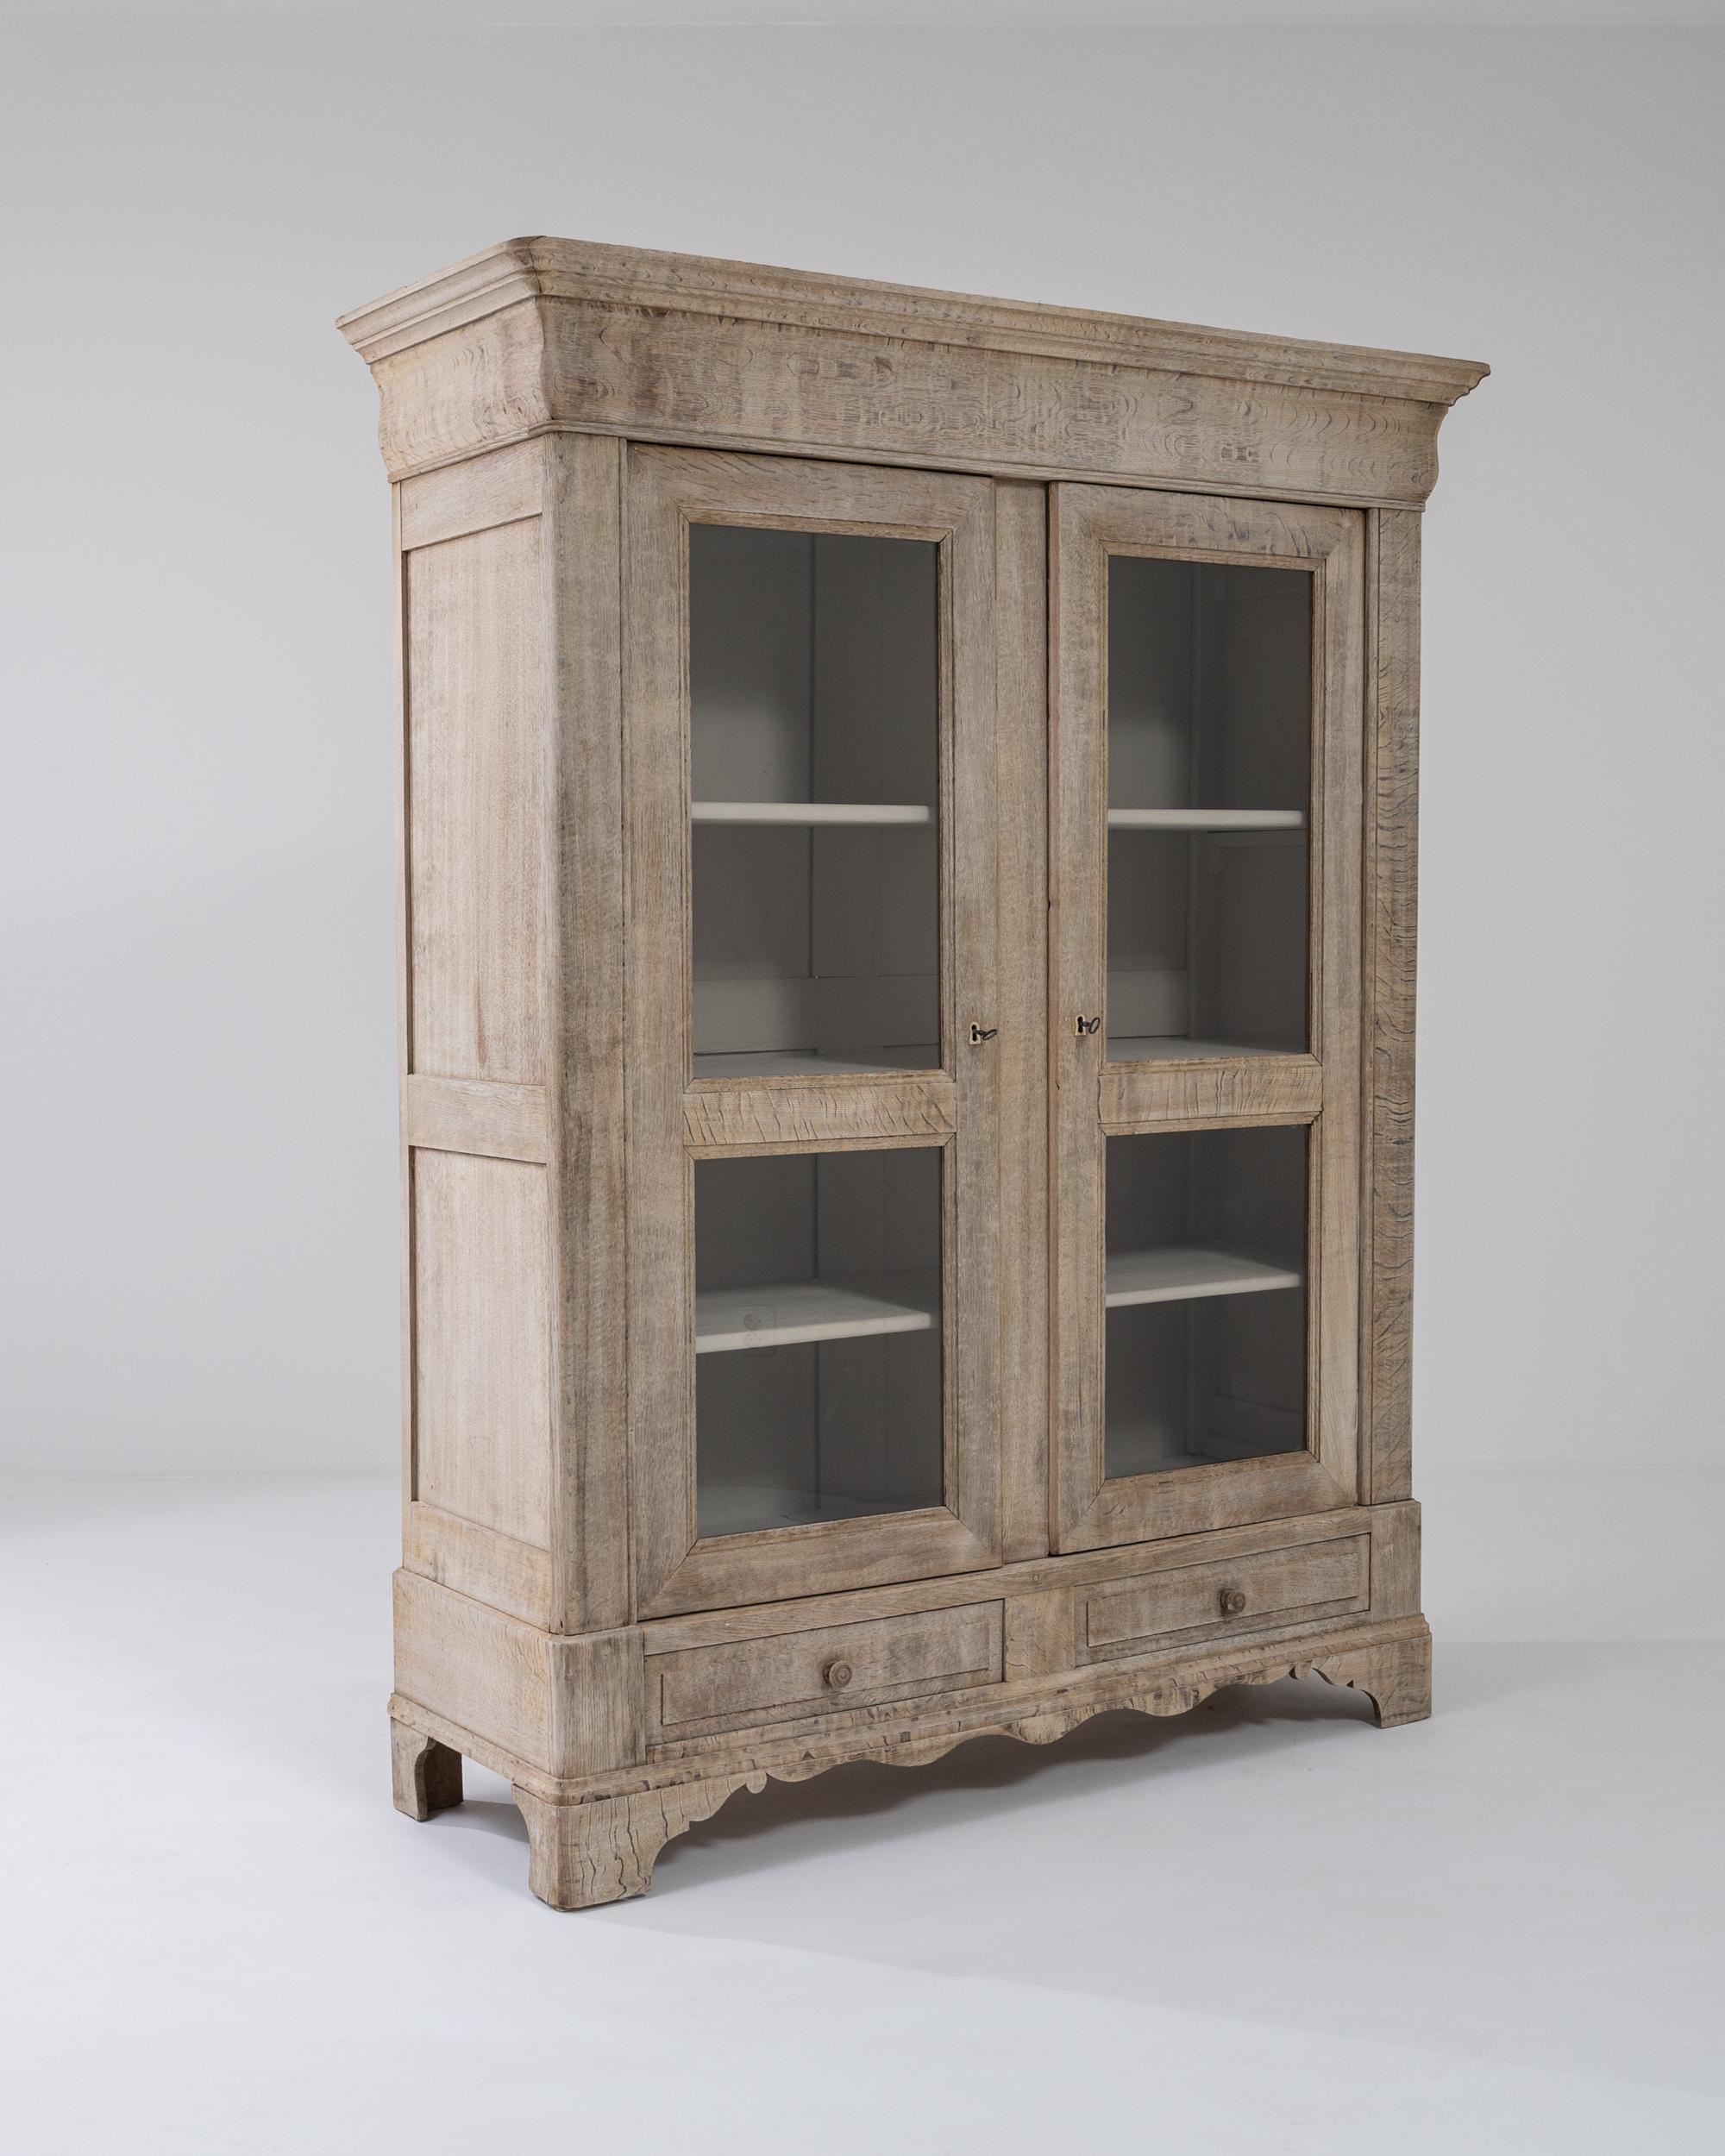 Simple yet elegant, this oak vitrine makes a delightful Provincial accent. Made in France in the 1800s, the silhouette is clean and restrained; the elegant contour of the apron brings out the attractive symmetry of the design. The windows of the